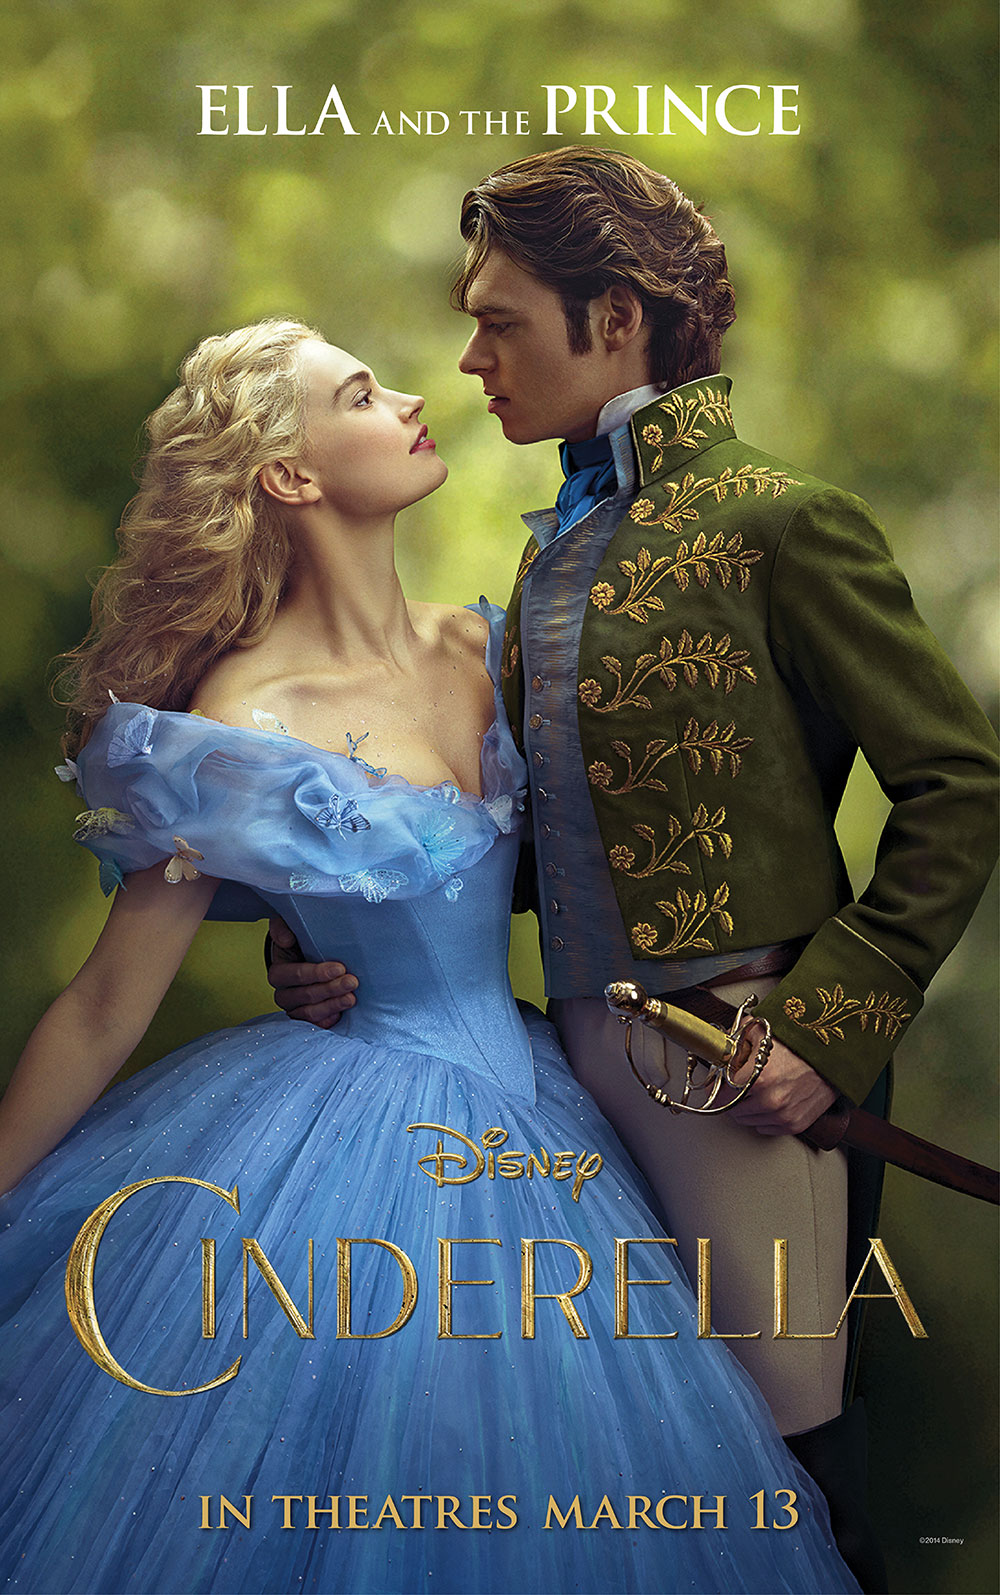 Walt Disney Pictures shares a new trailer from Cinderella